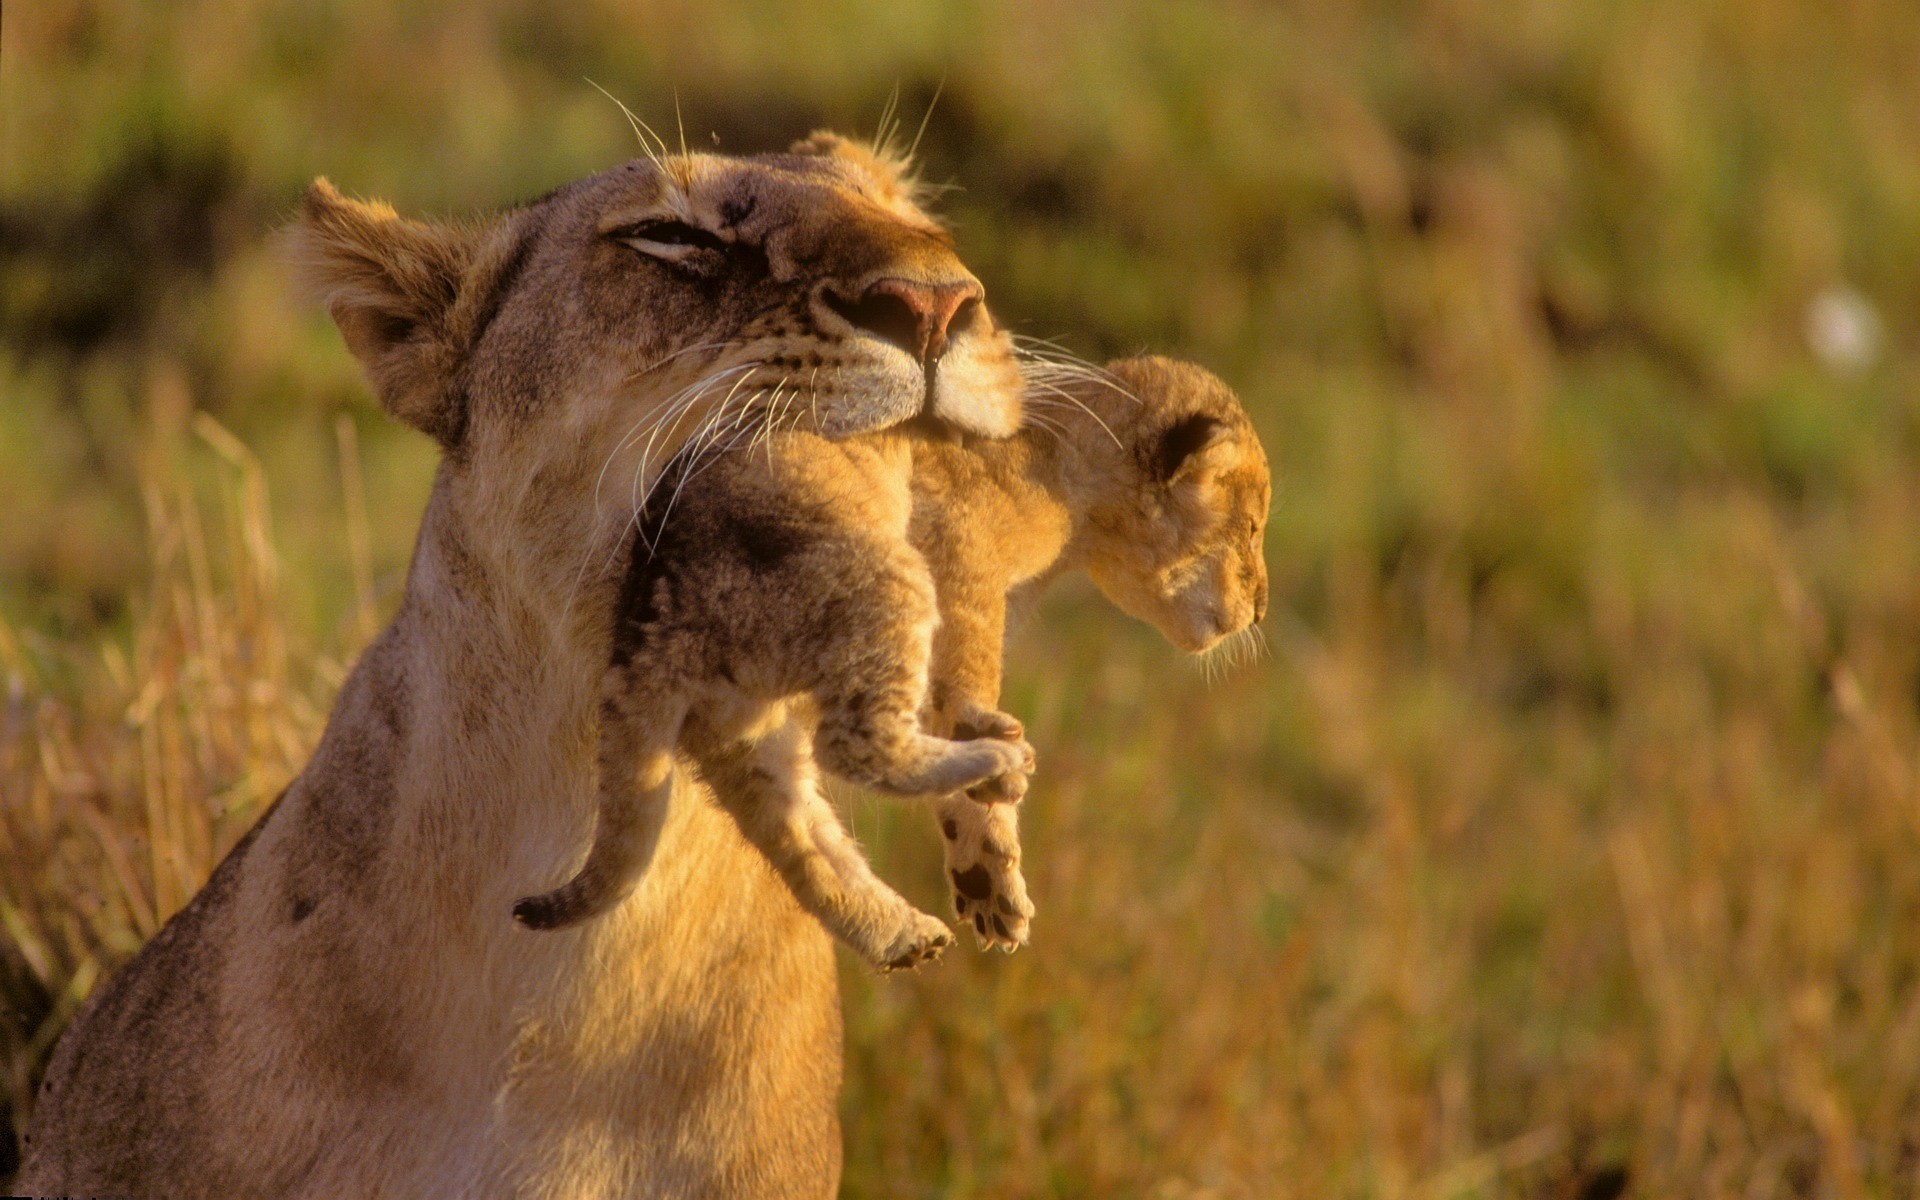 Mother Carrying and Nurturing her Cub